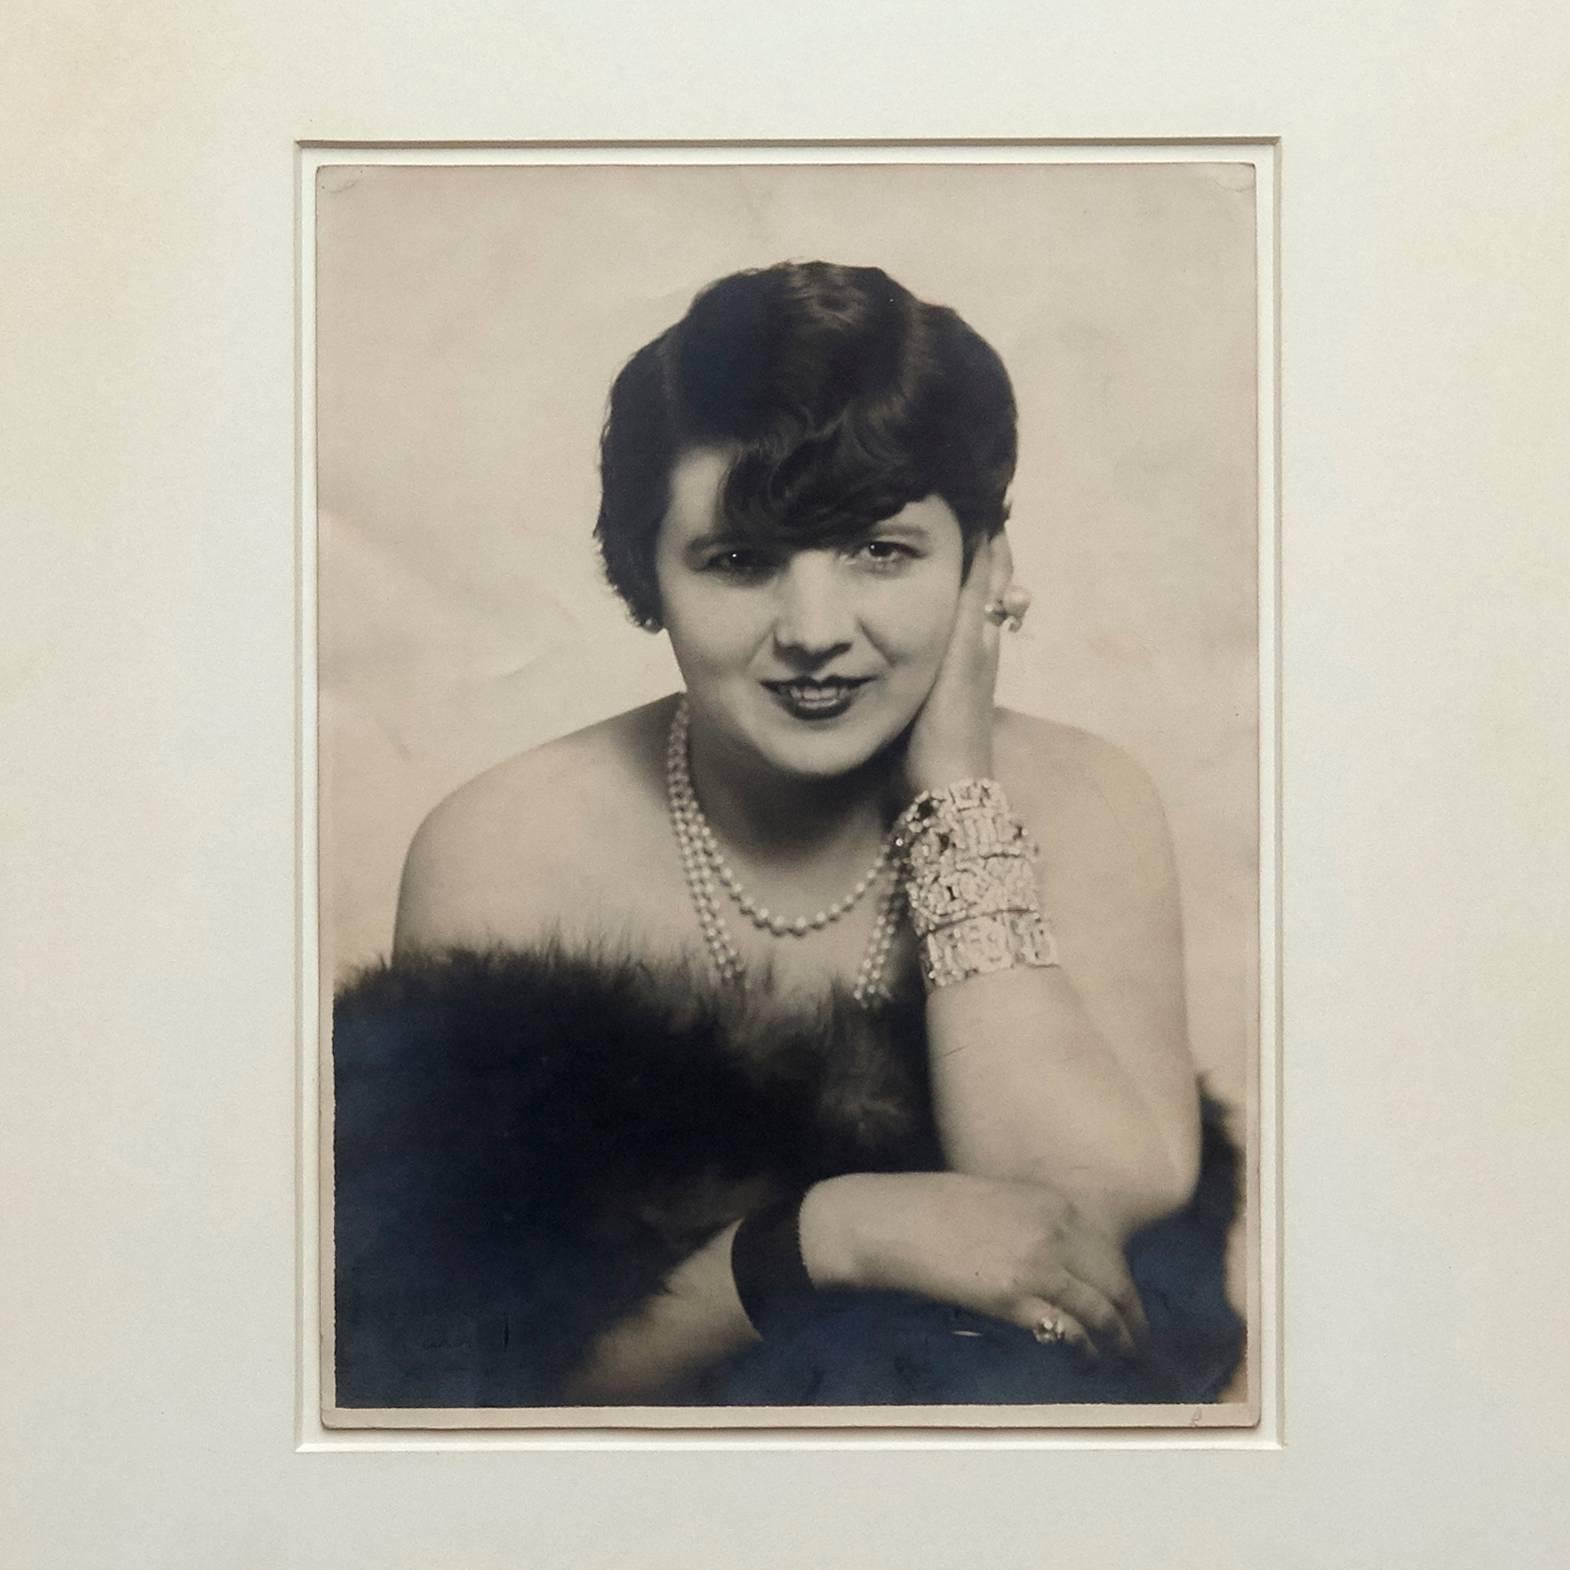 Man Ray photography of Gigi, 1927.

Handsigned in pencil.
Stamped by Man Ray Paris.

Born (Philadelphia, 1890 - Paris, 1976) Emmanuel Radnitzky, Man Ray adopted his pseudonym in 1909, and would become one of the key figures of Dada and